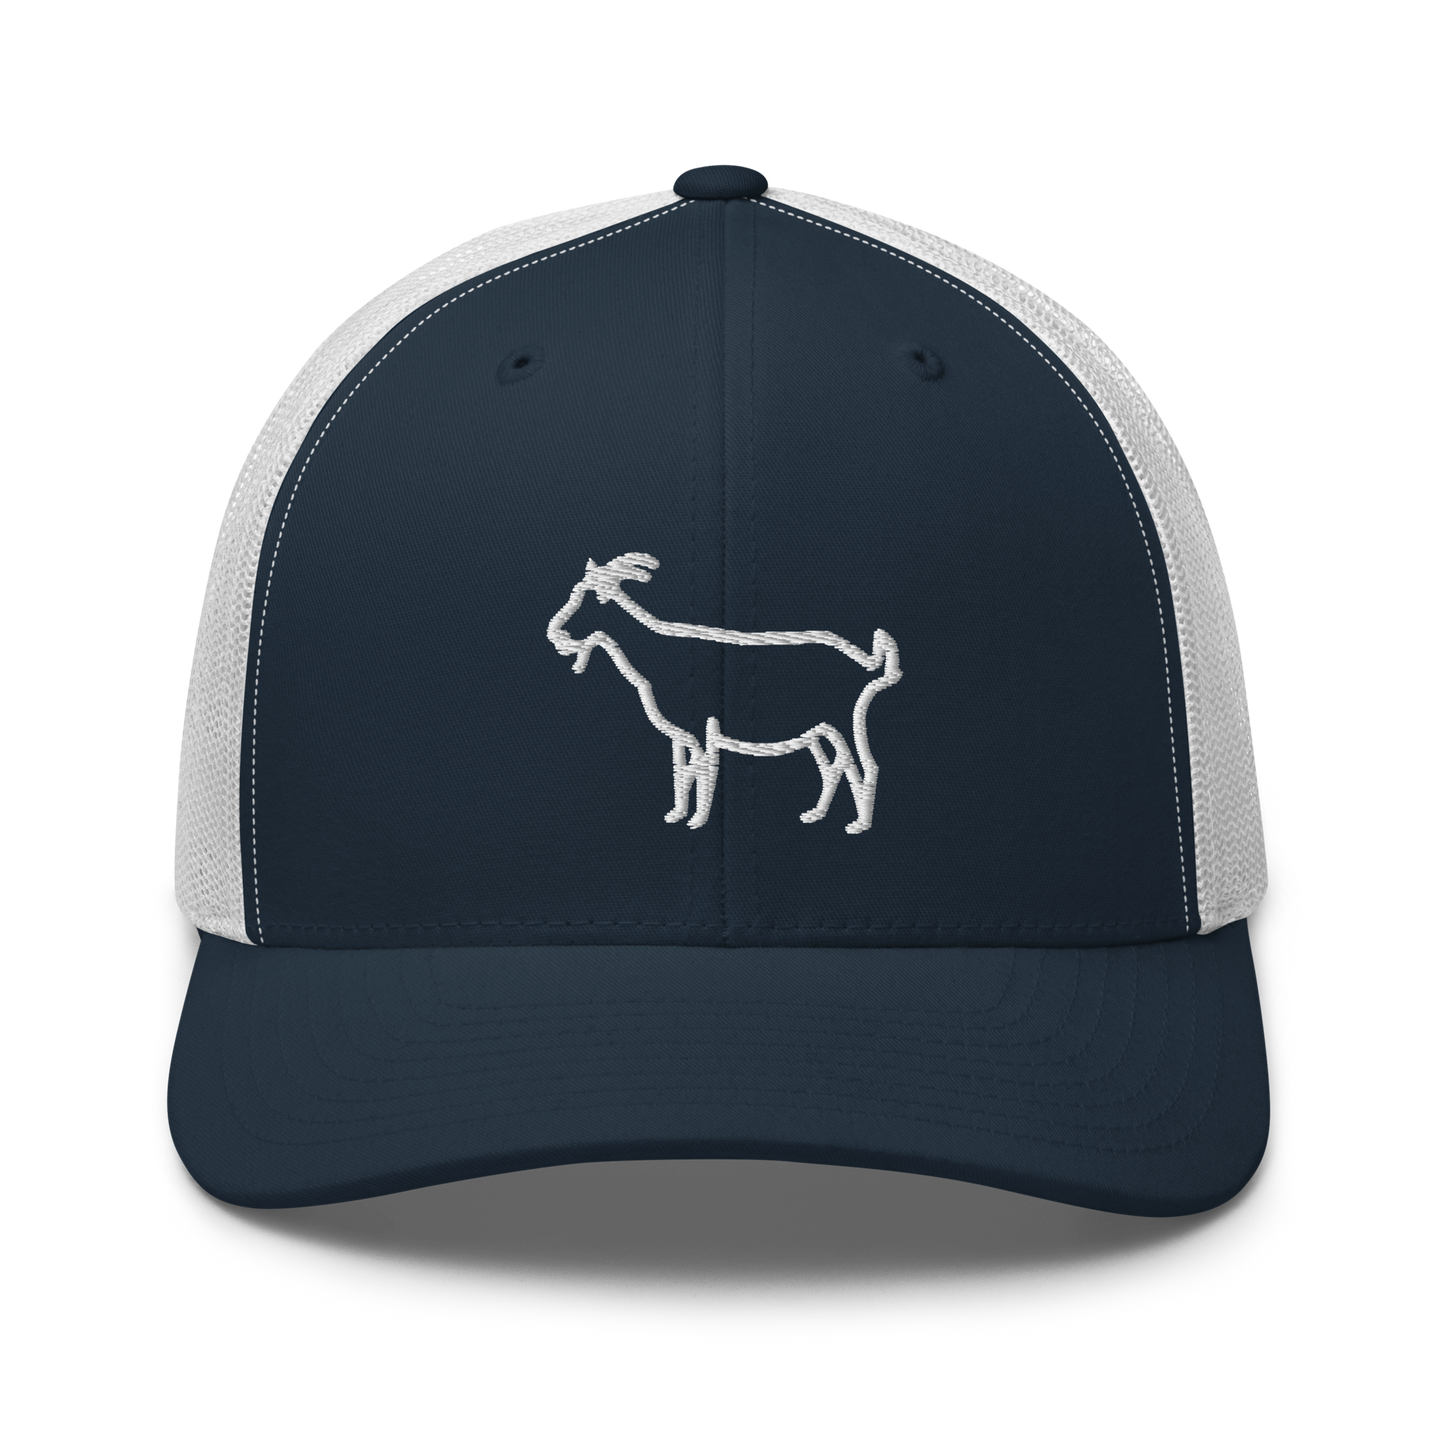 The Goat Trucker Cap | Flat Embroidery | Inspired BMFS Art